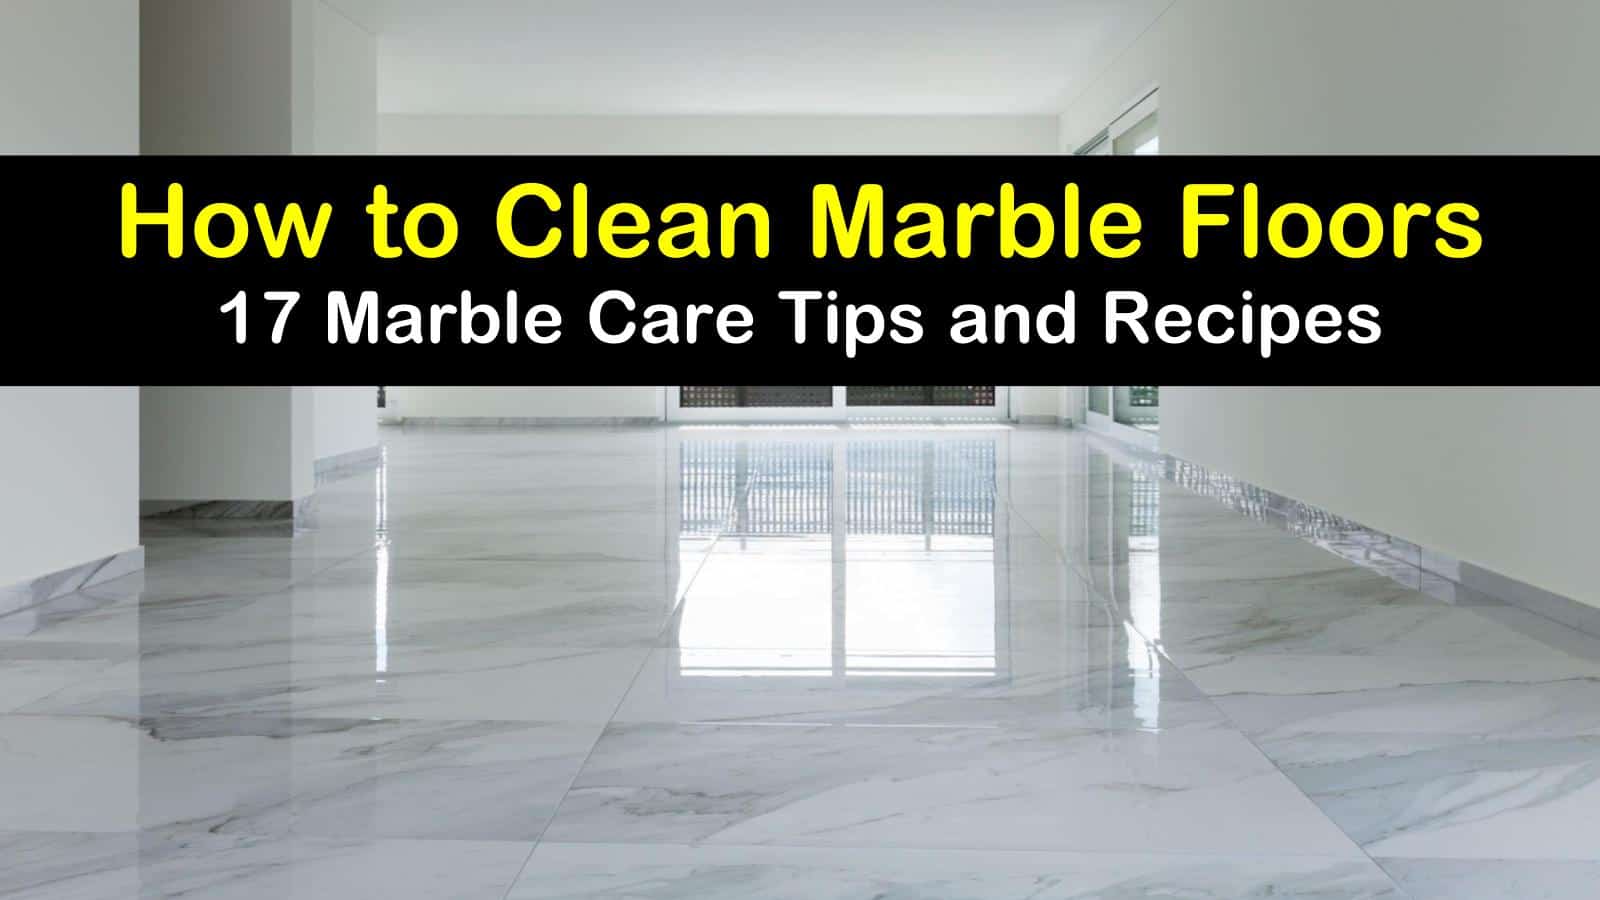 17 Clever Ways To Clean Marble Floors, How To Polish Marble Floor Tiles